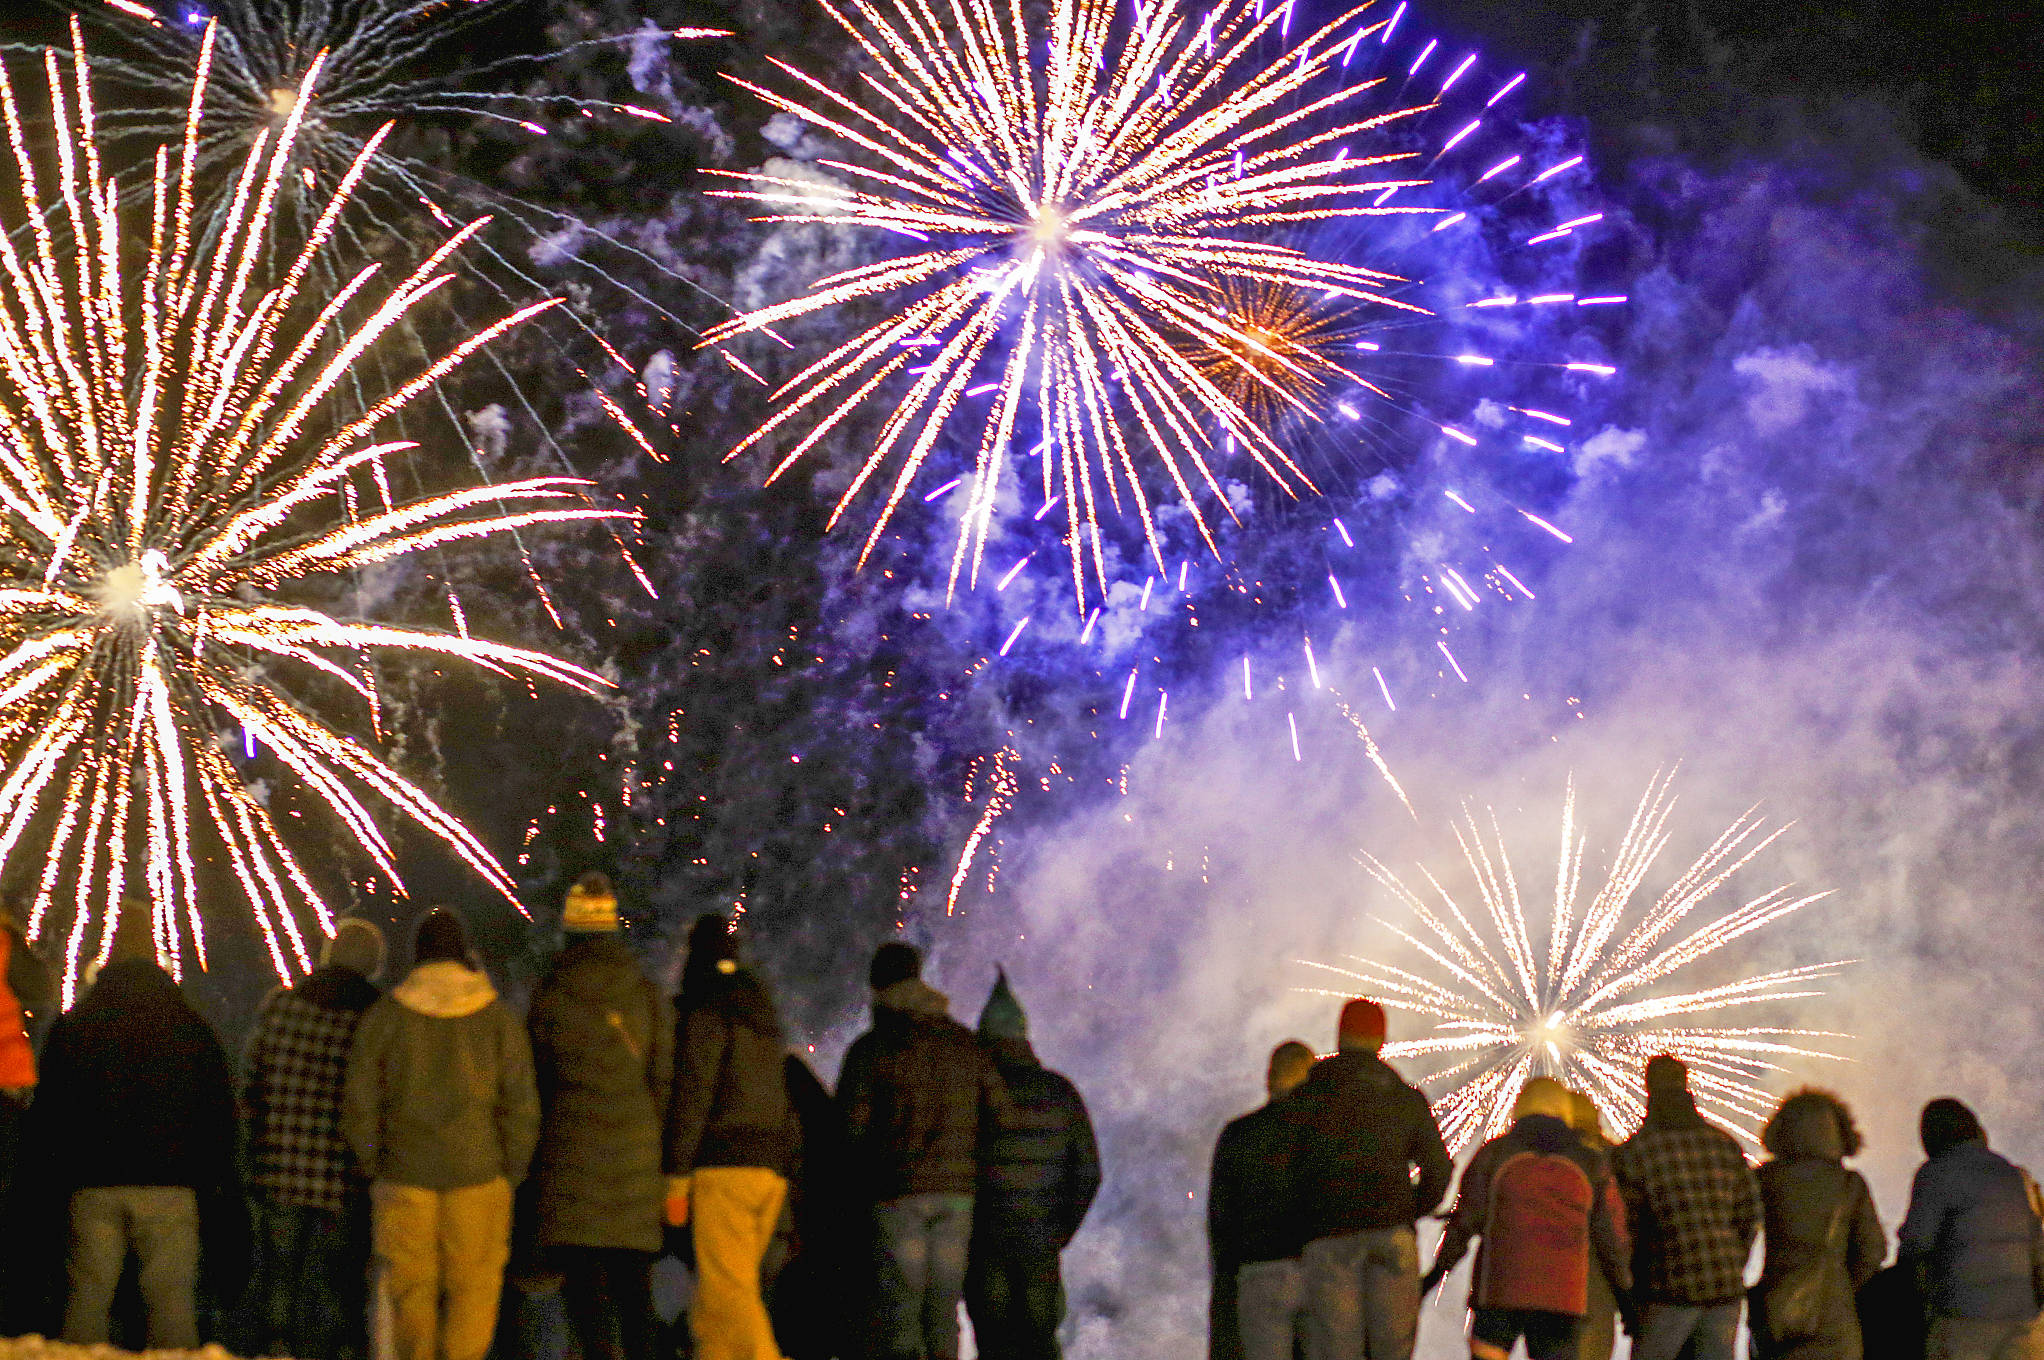 Firework laws vary, safety always top priority